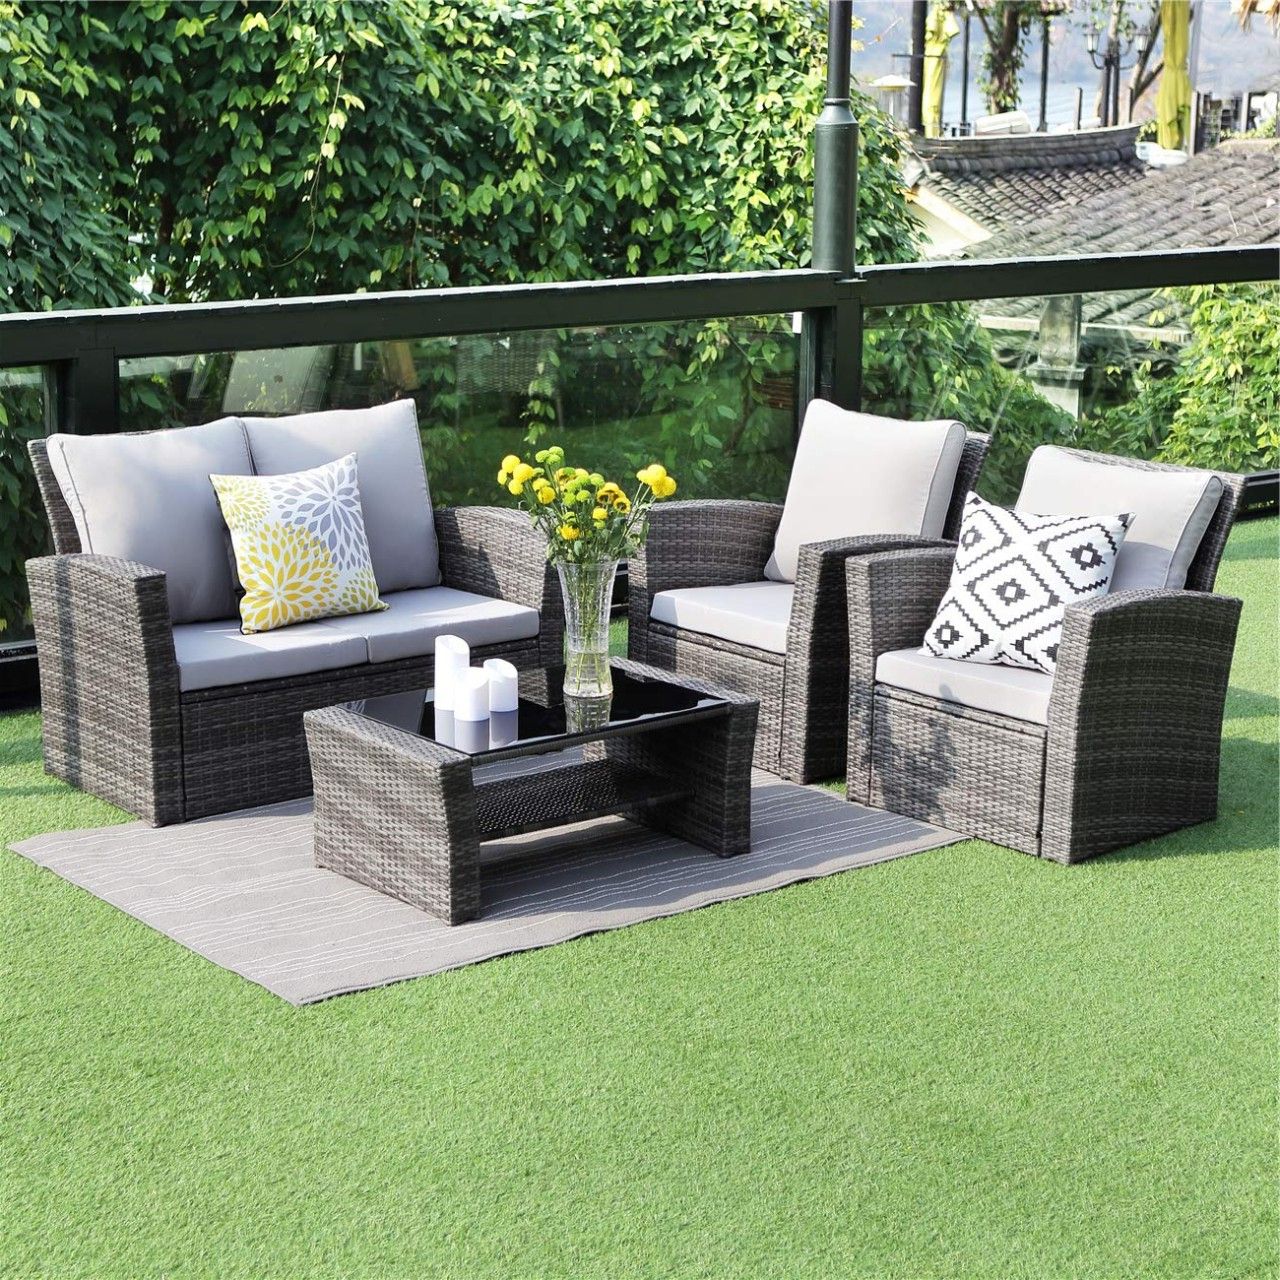 Famous Gray All Weather Outdoor Seating Patio Sets Throughout 5 Piece Outdoor Patio Furniture Sets, Wicker Ratten Sectional Sofa With (View 12 of 15)